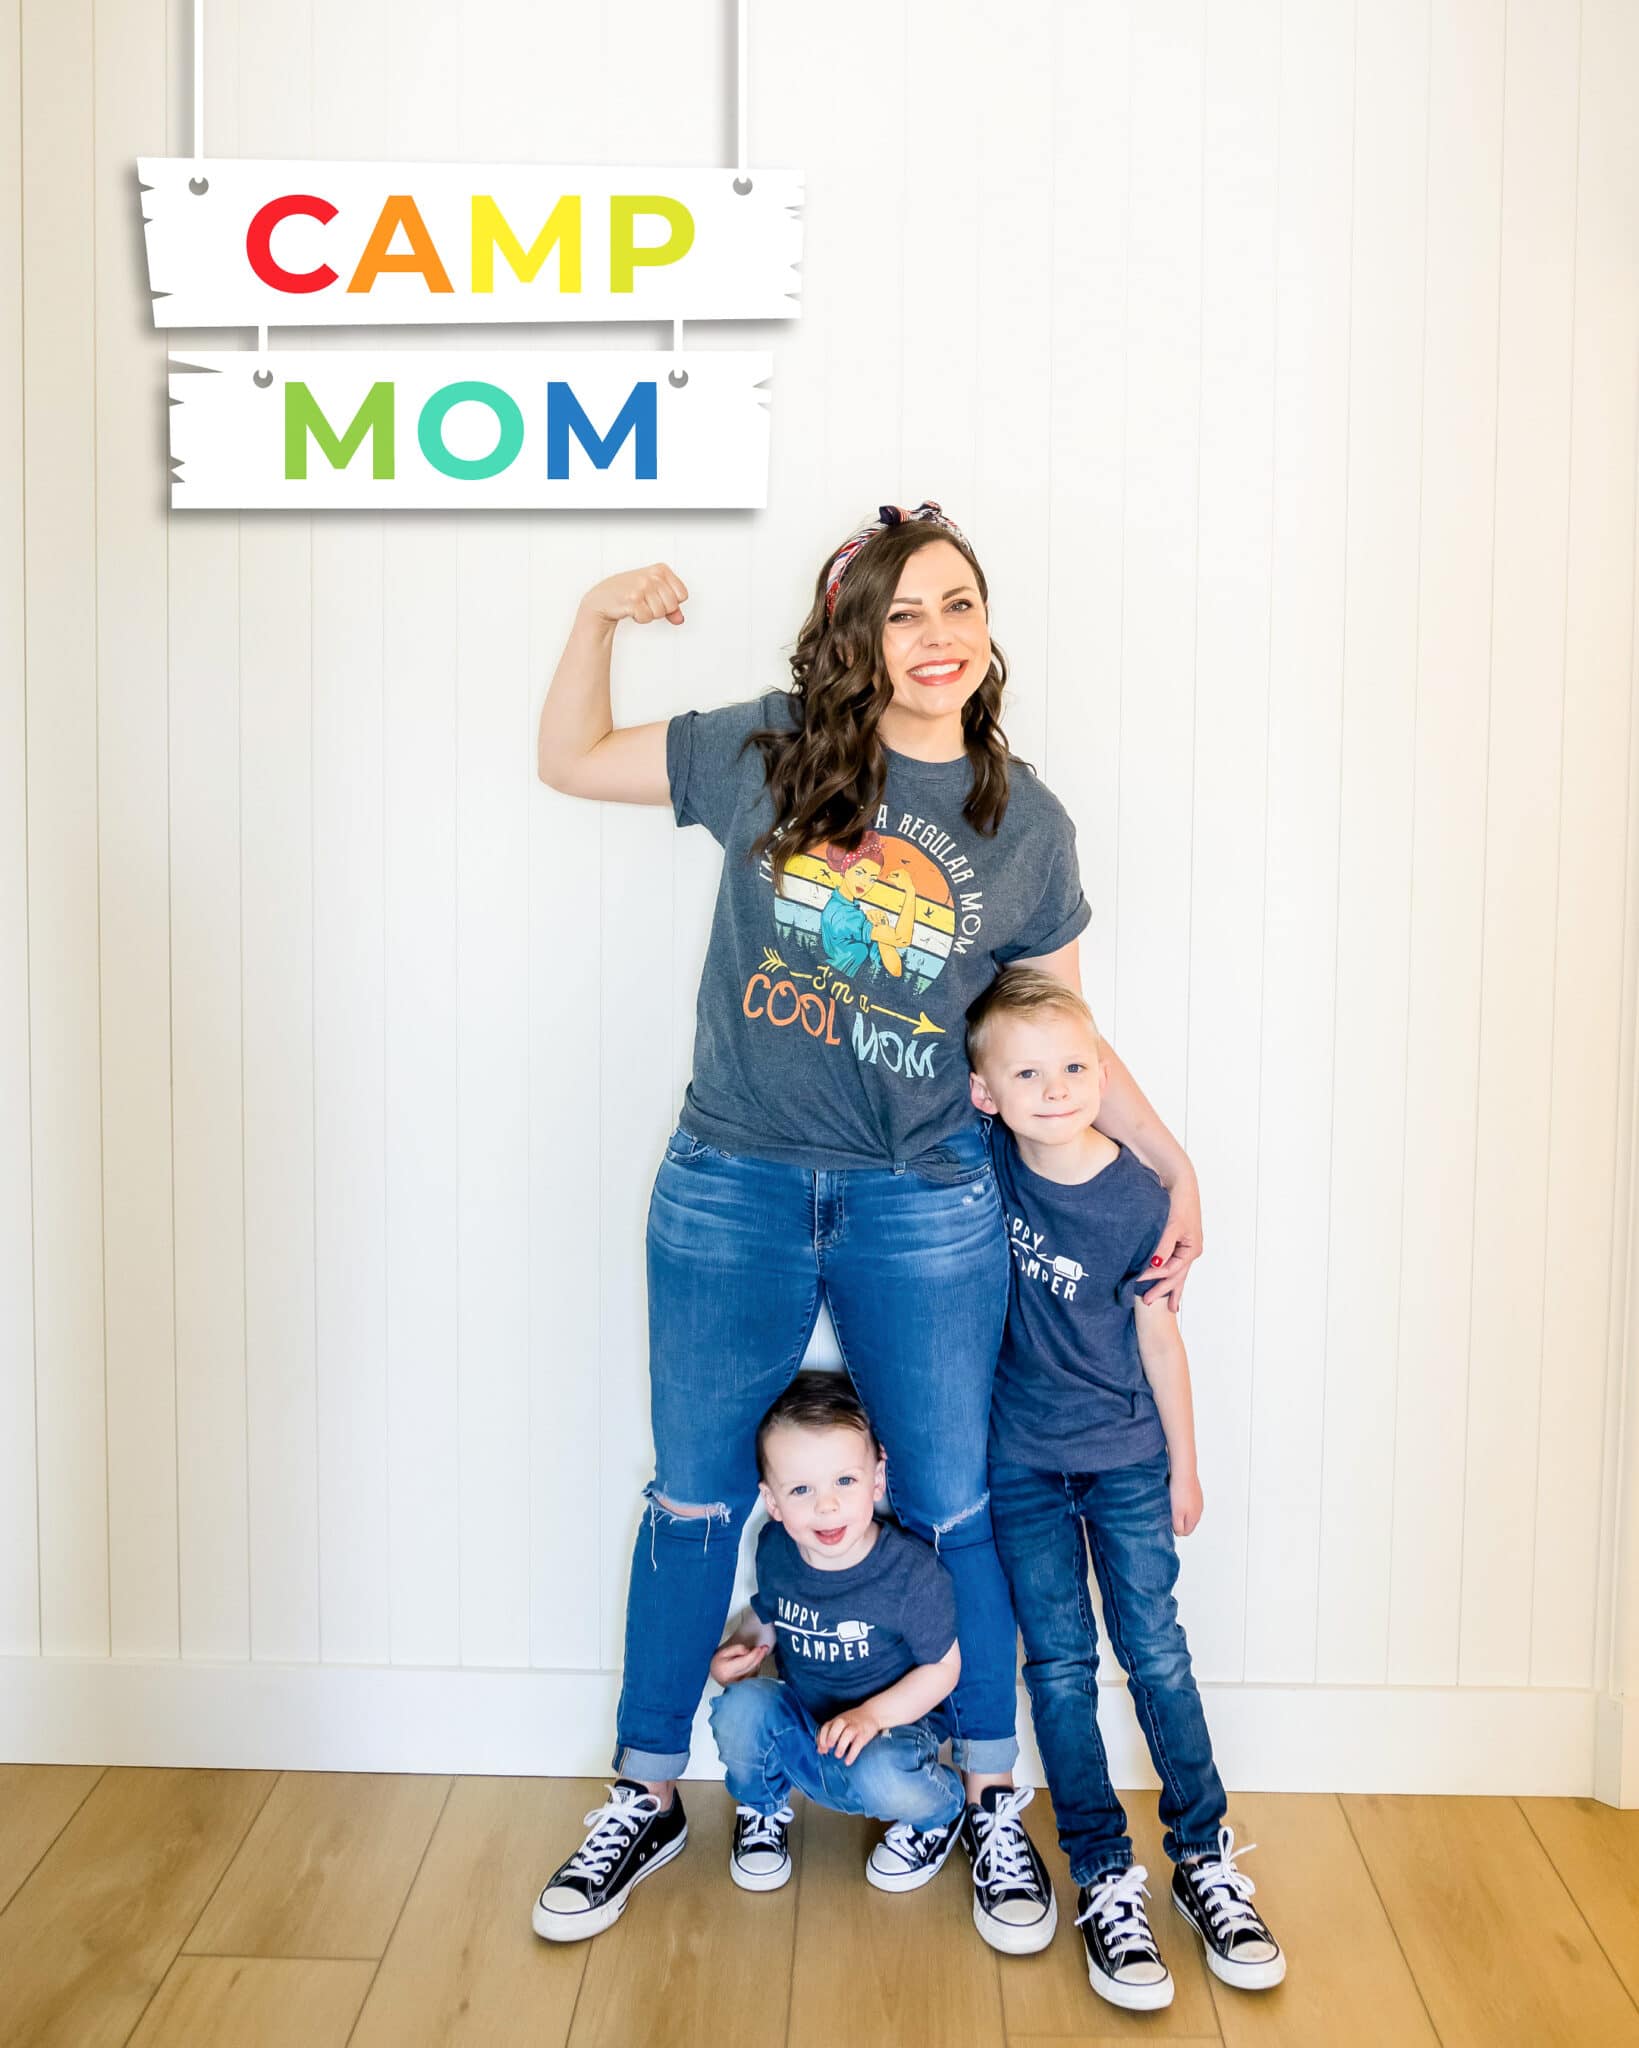 Summer Camp Ideas At Home: Camp Mom Series